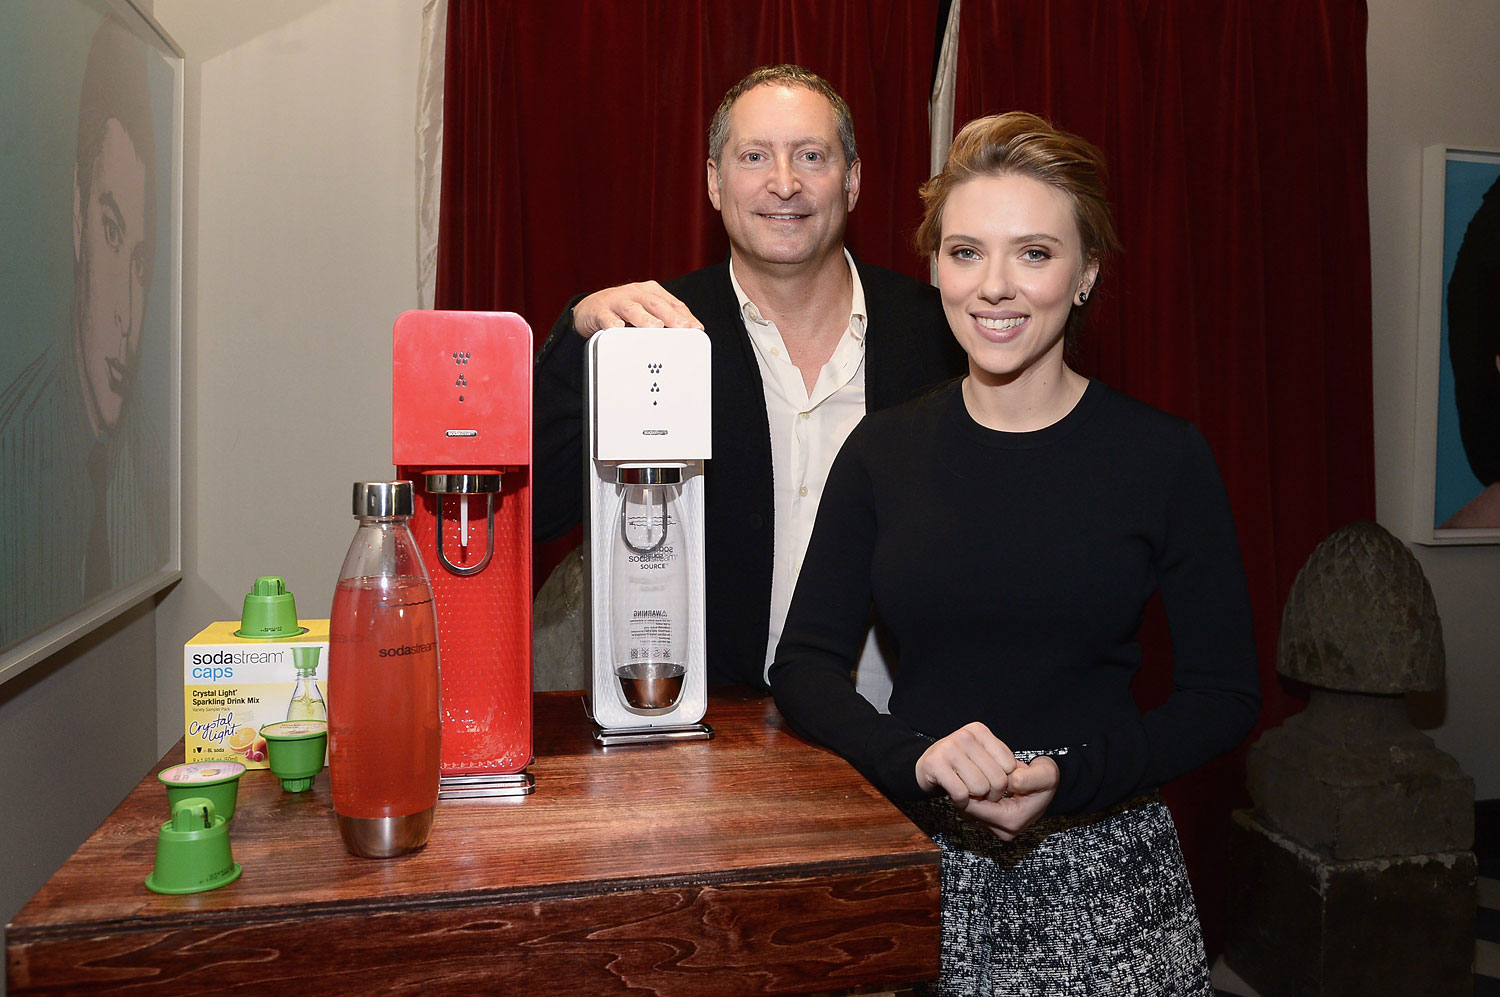 FILE: Scarlett Johansson Steps Down As Oxfam Ambassador After SodaStream Controversy